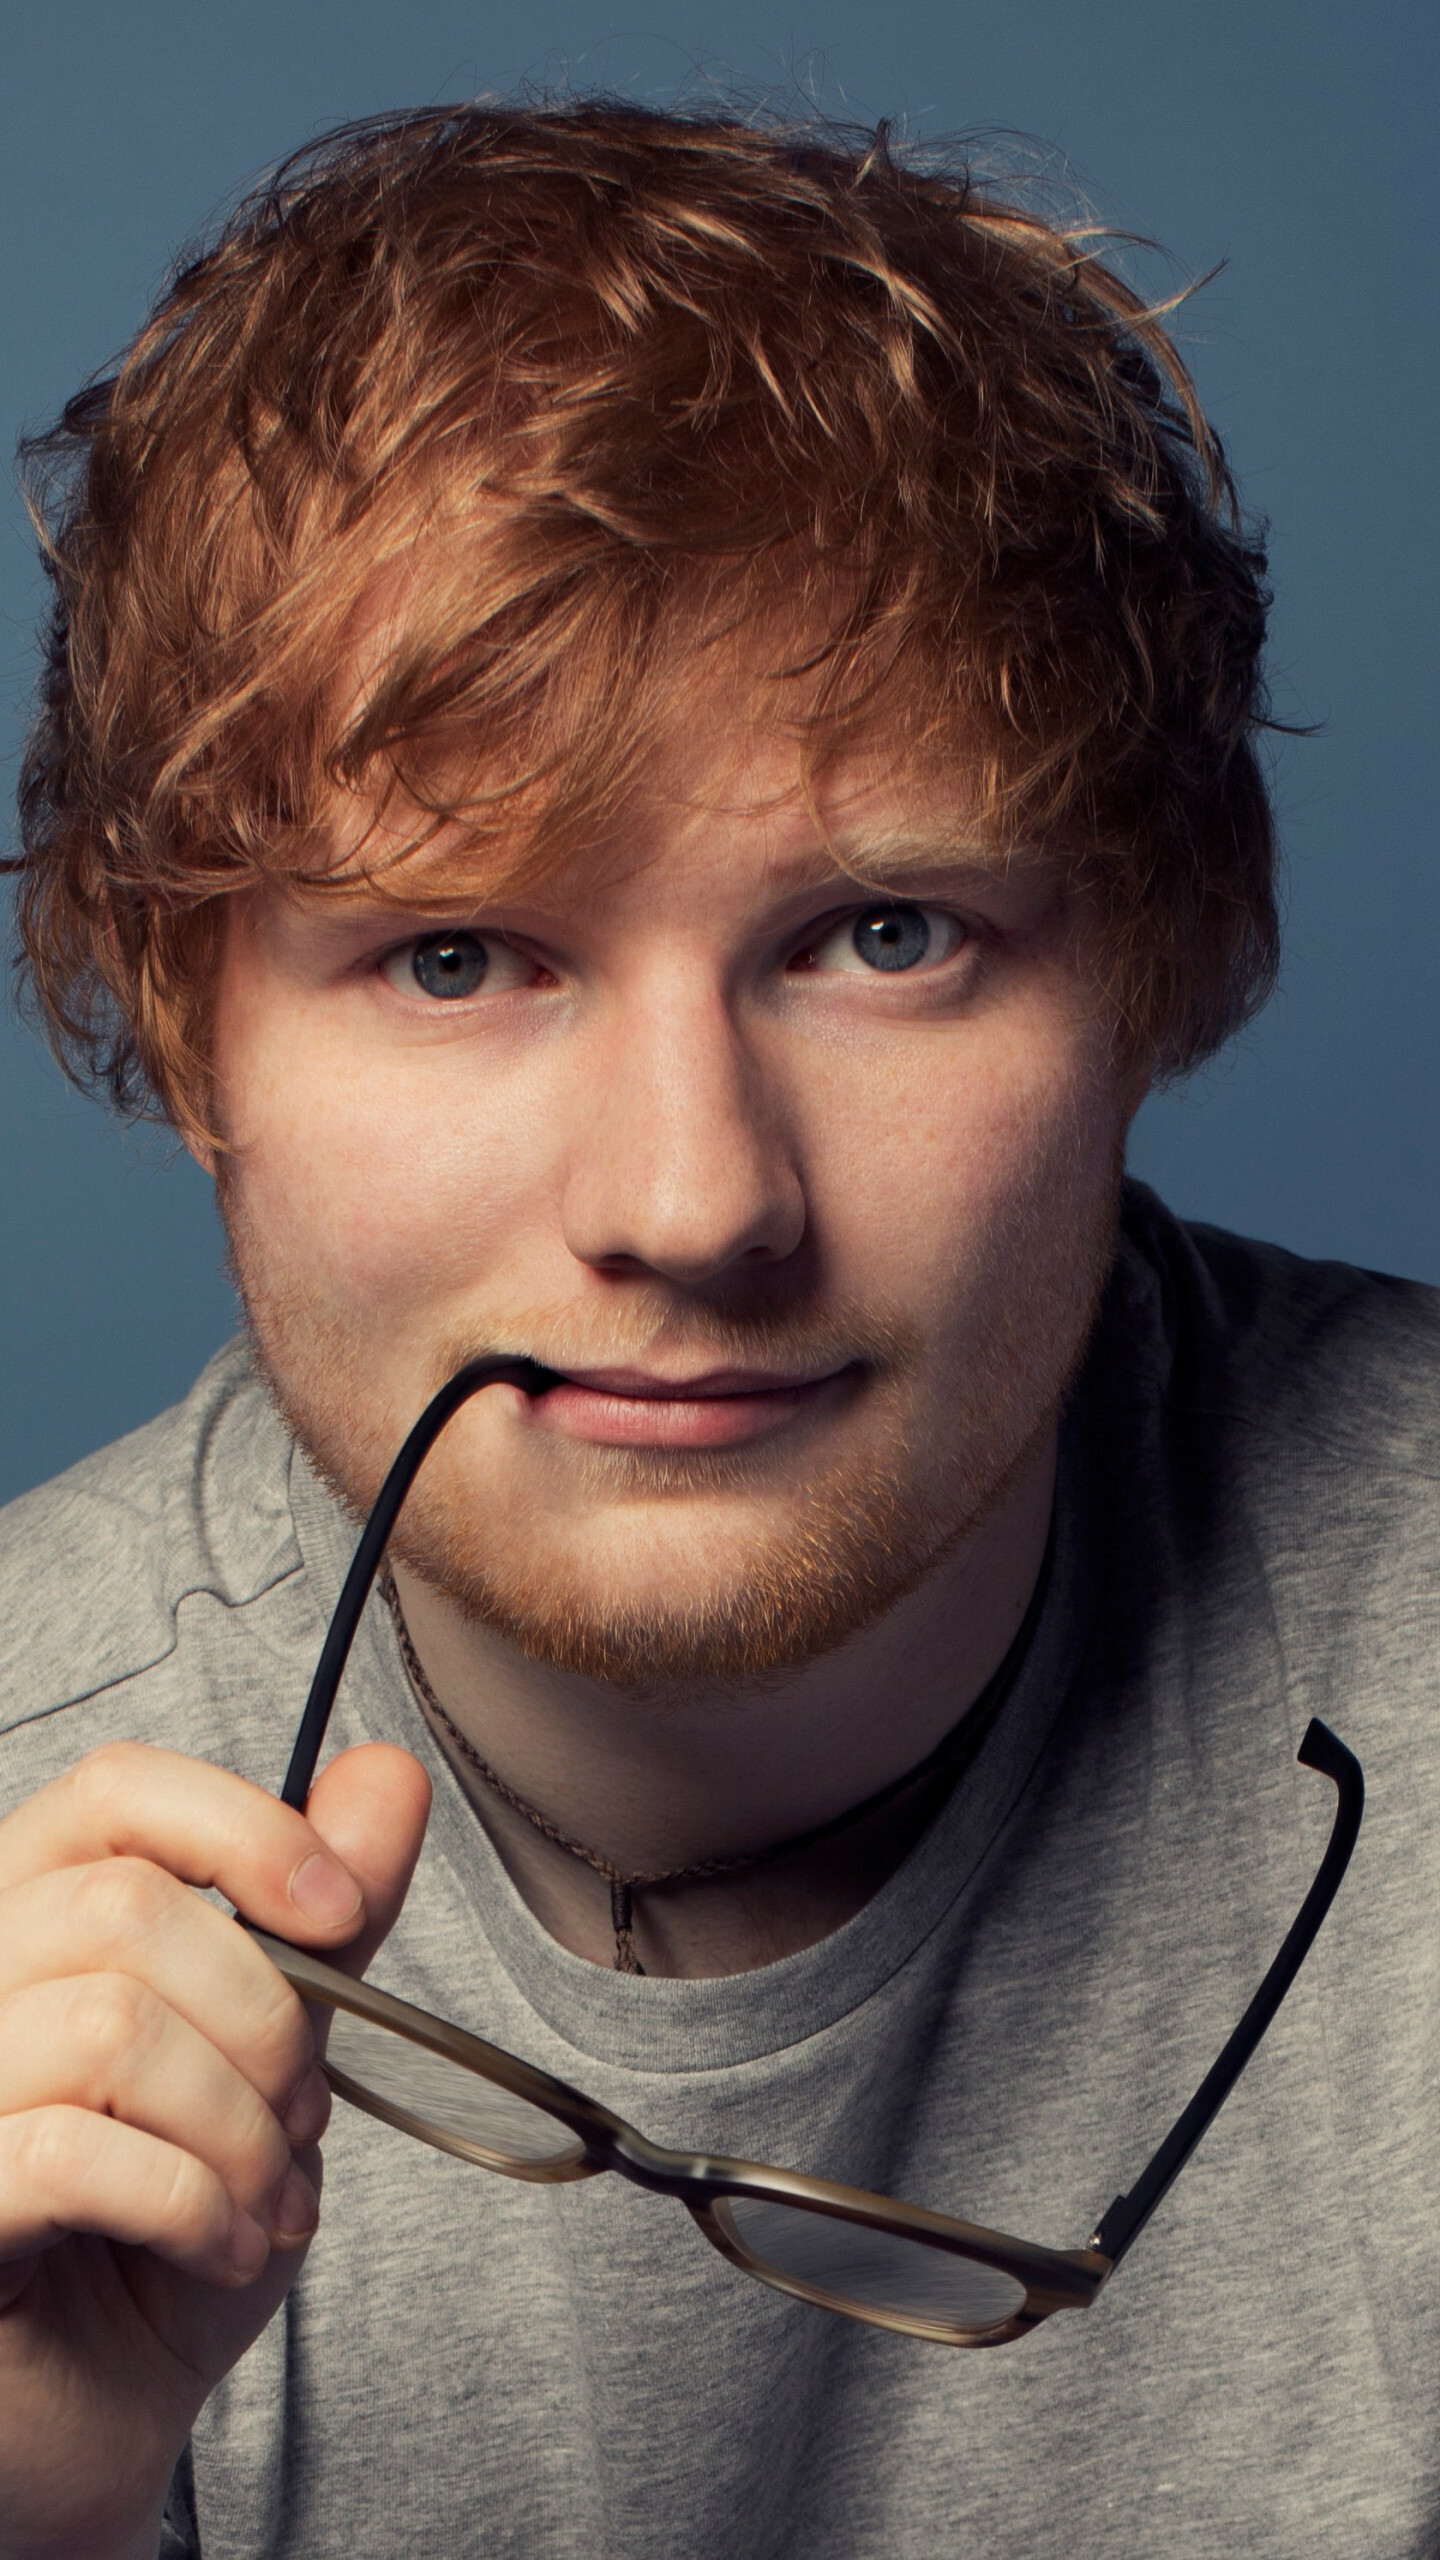 Ed Sheeran: "Sing" became the singer's first UK number-one song. 1440x2560 HD Wallpaper.